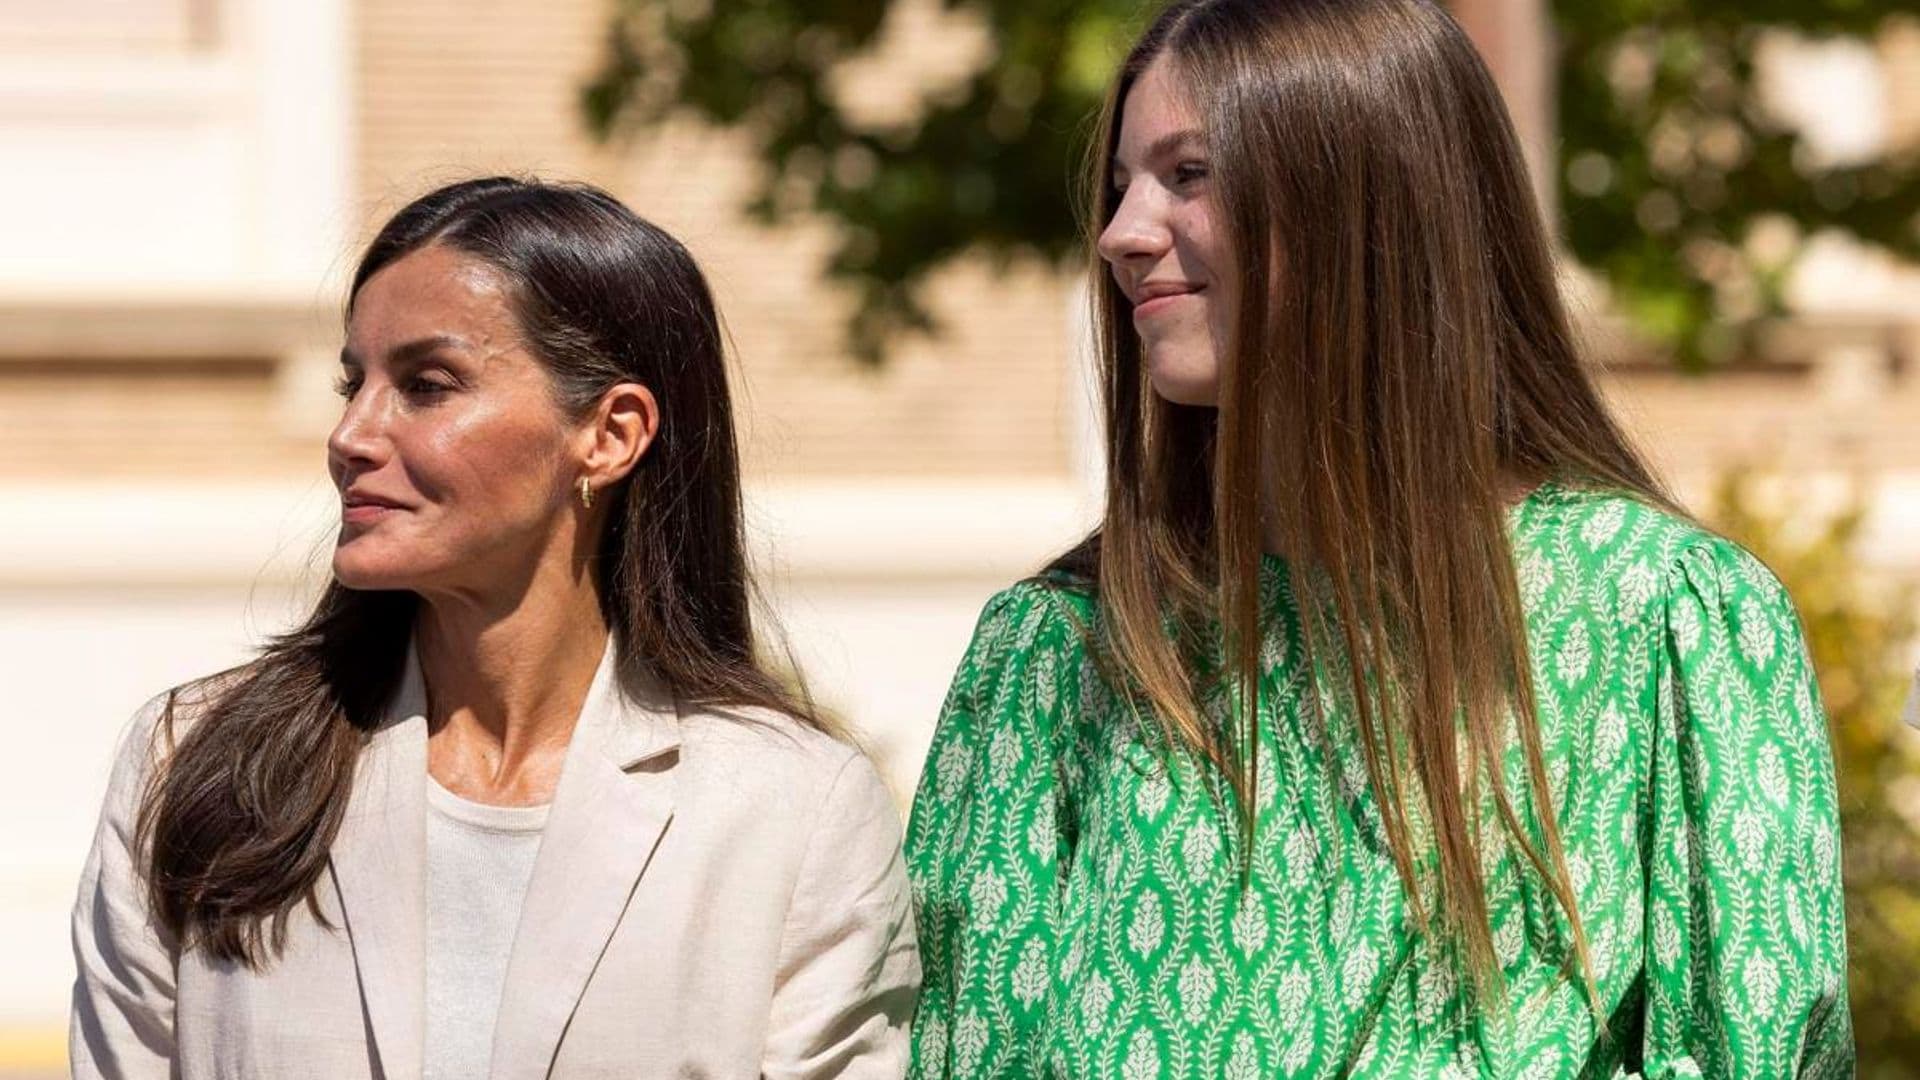 Queen Letizia and Infanta Sofia to take mother-daughter trip before start of the school year